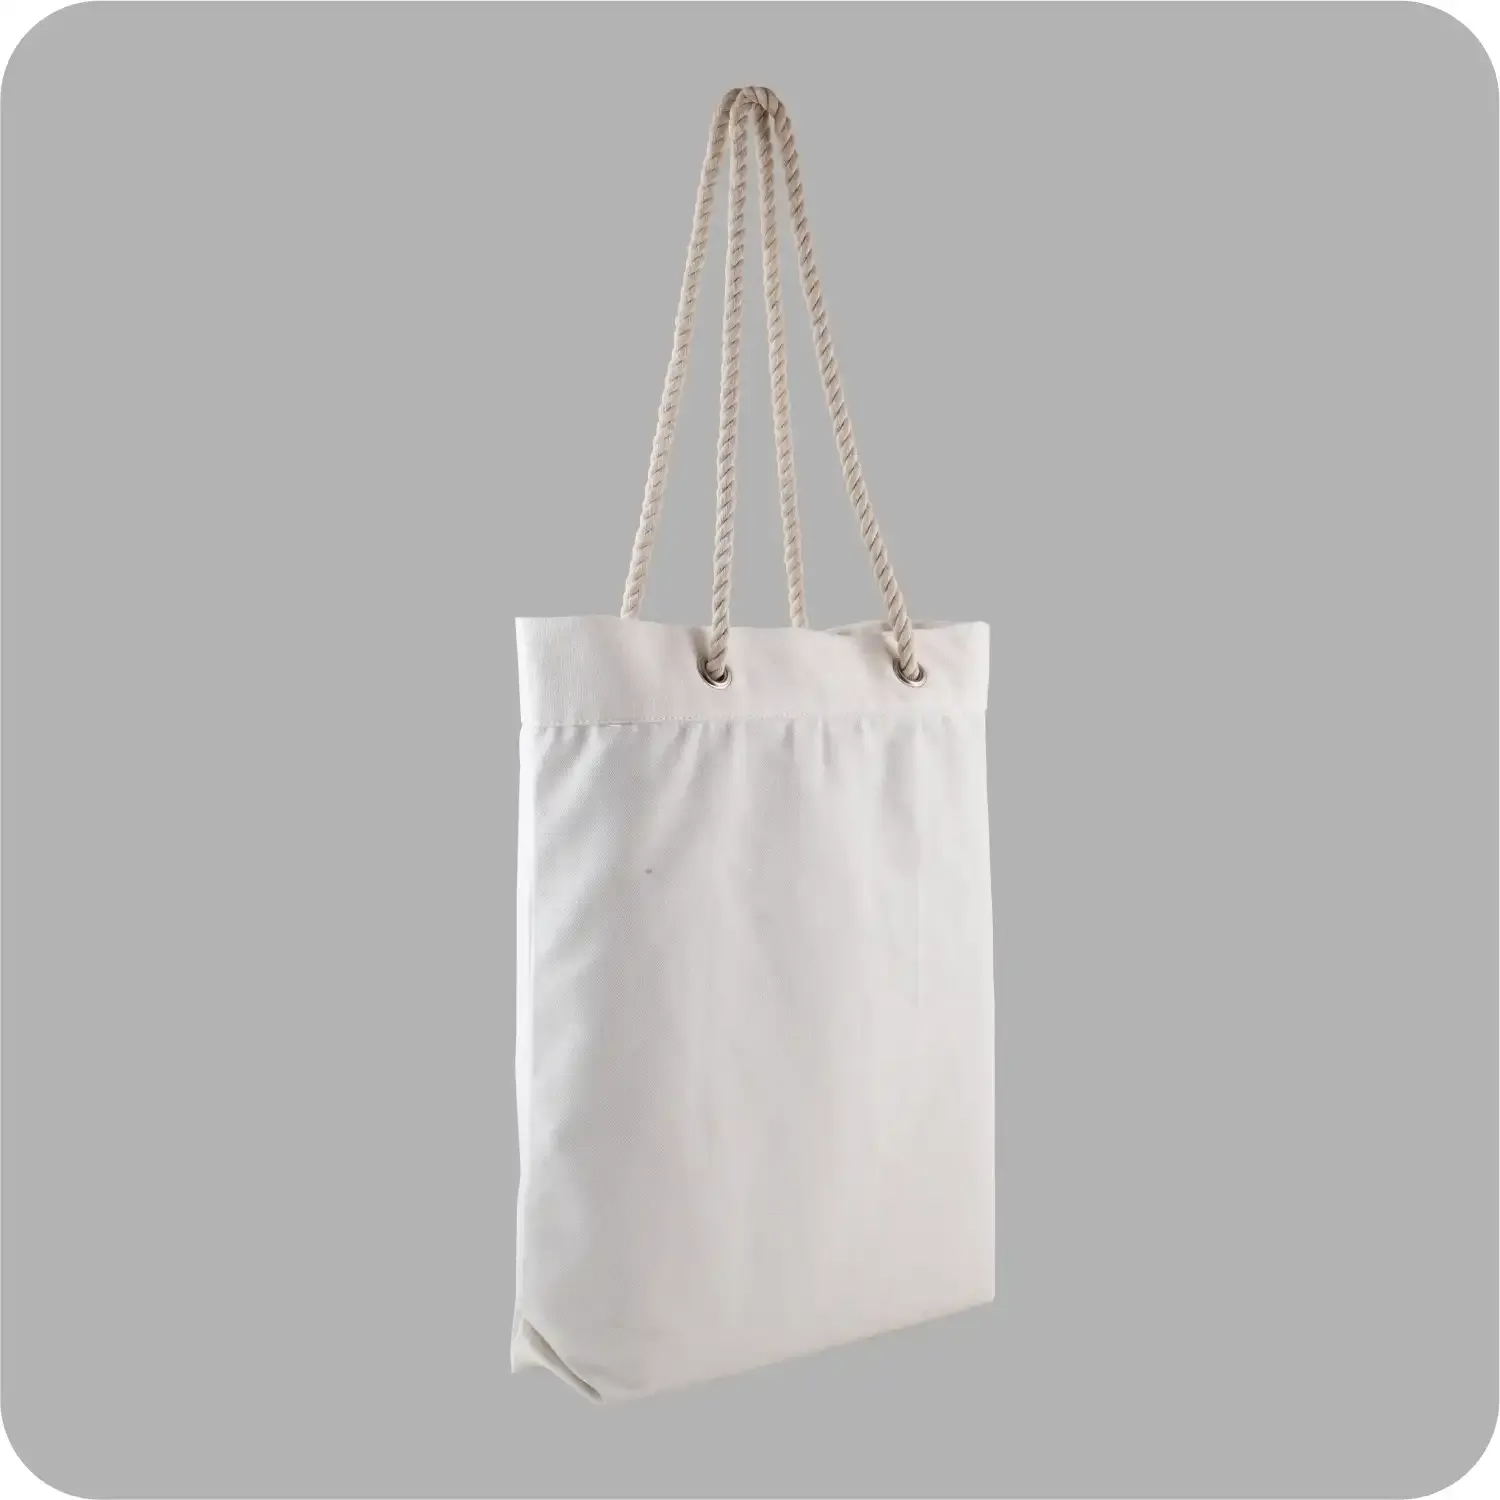 Hippy 15”x16” Inches Robust Handy Off white Canvas Bags